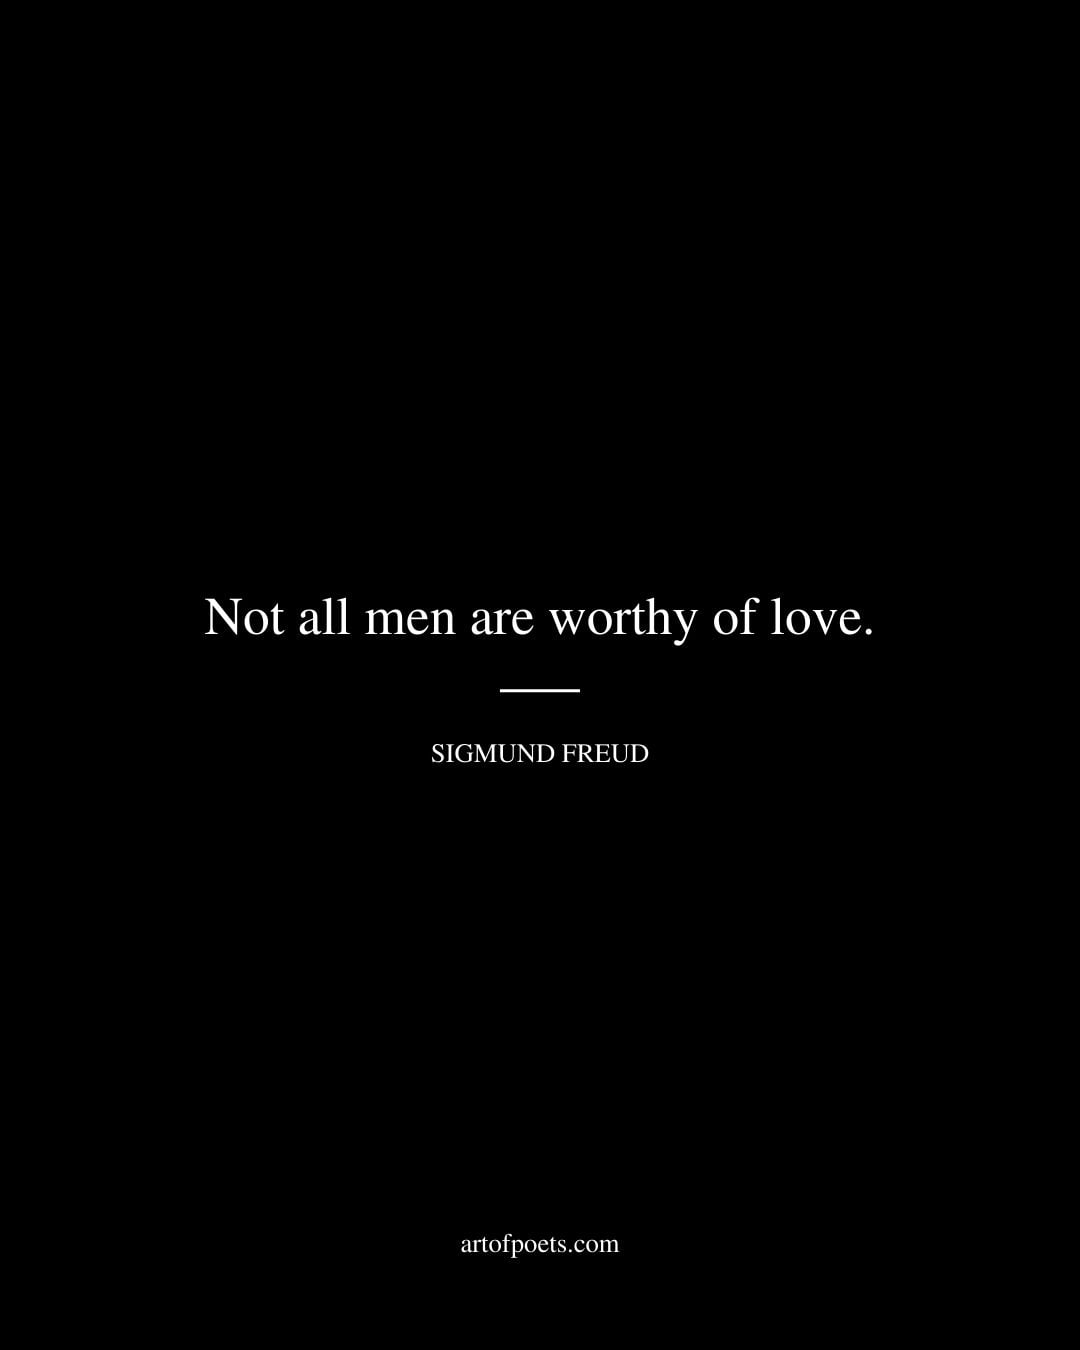 Not all men are worthy of love